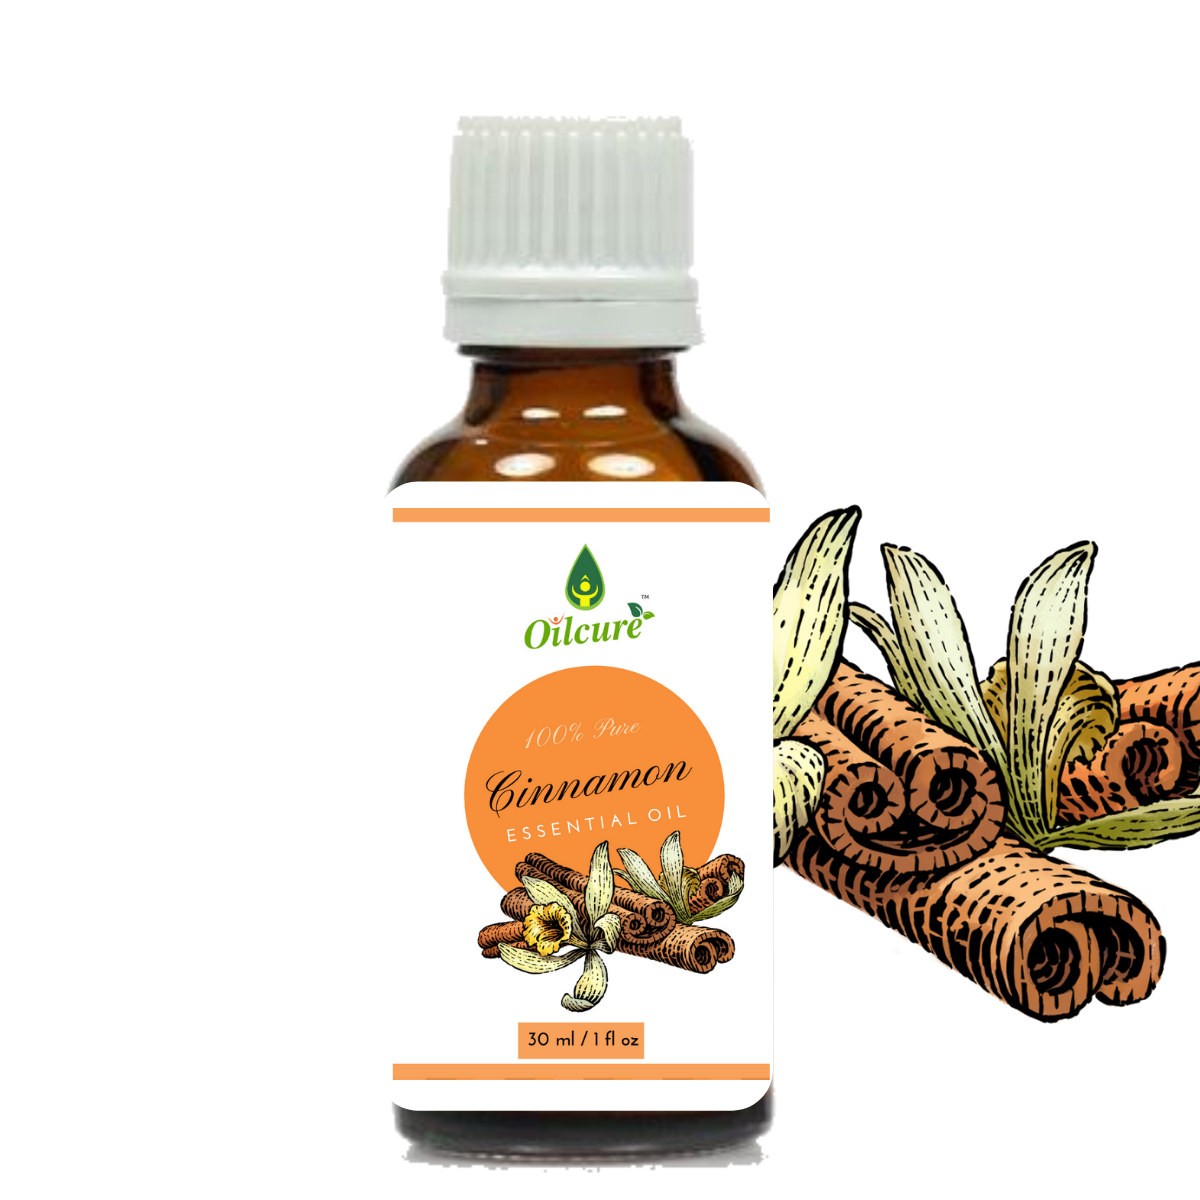 Cinnamon bark oil has a warm, spicy, and sweet aroma, and is used in aromatherapy for its calming and comforting properties